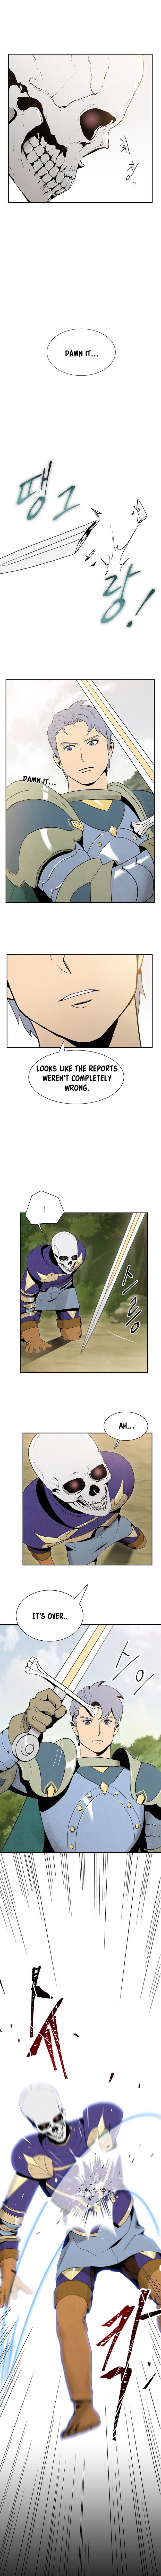 skeleton-soldier-couldnt-protect-the-dungeon-chap-11-7